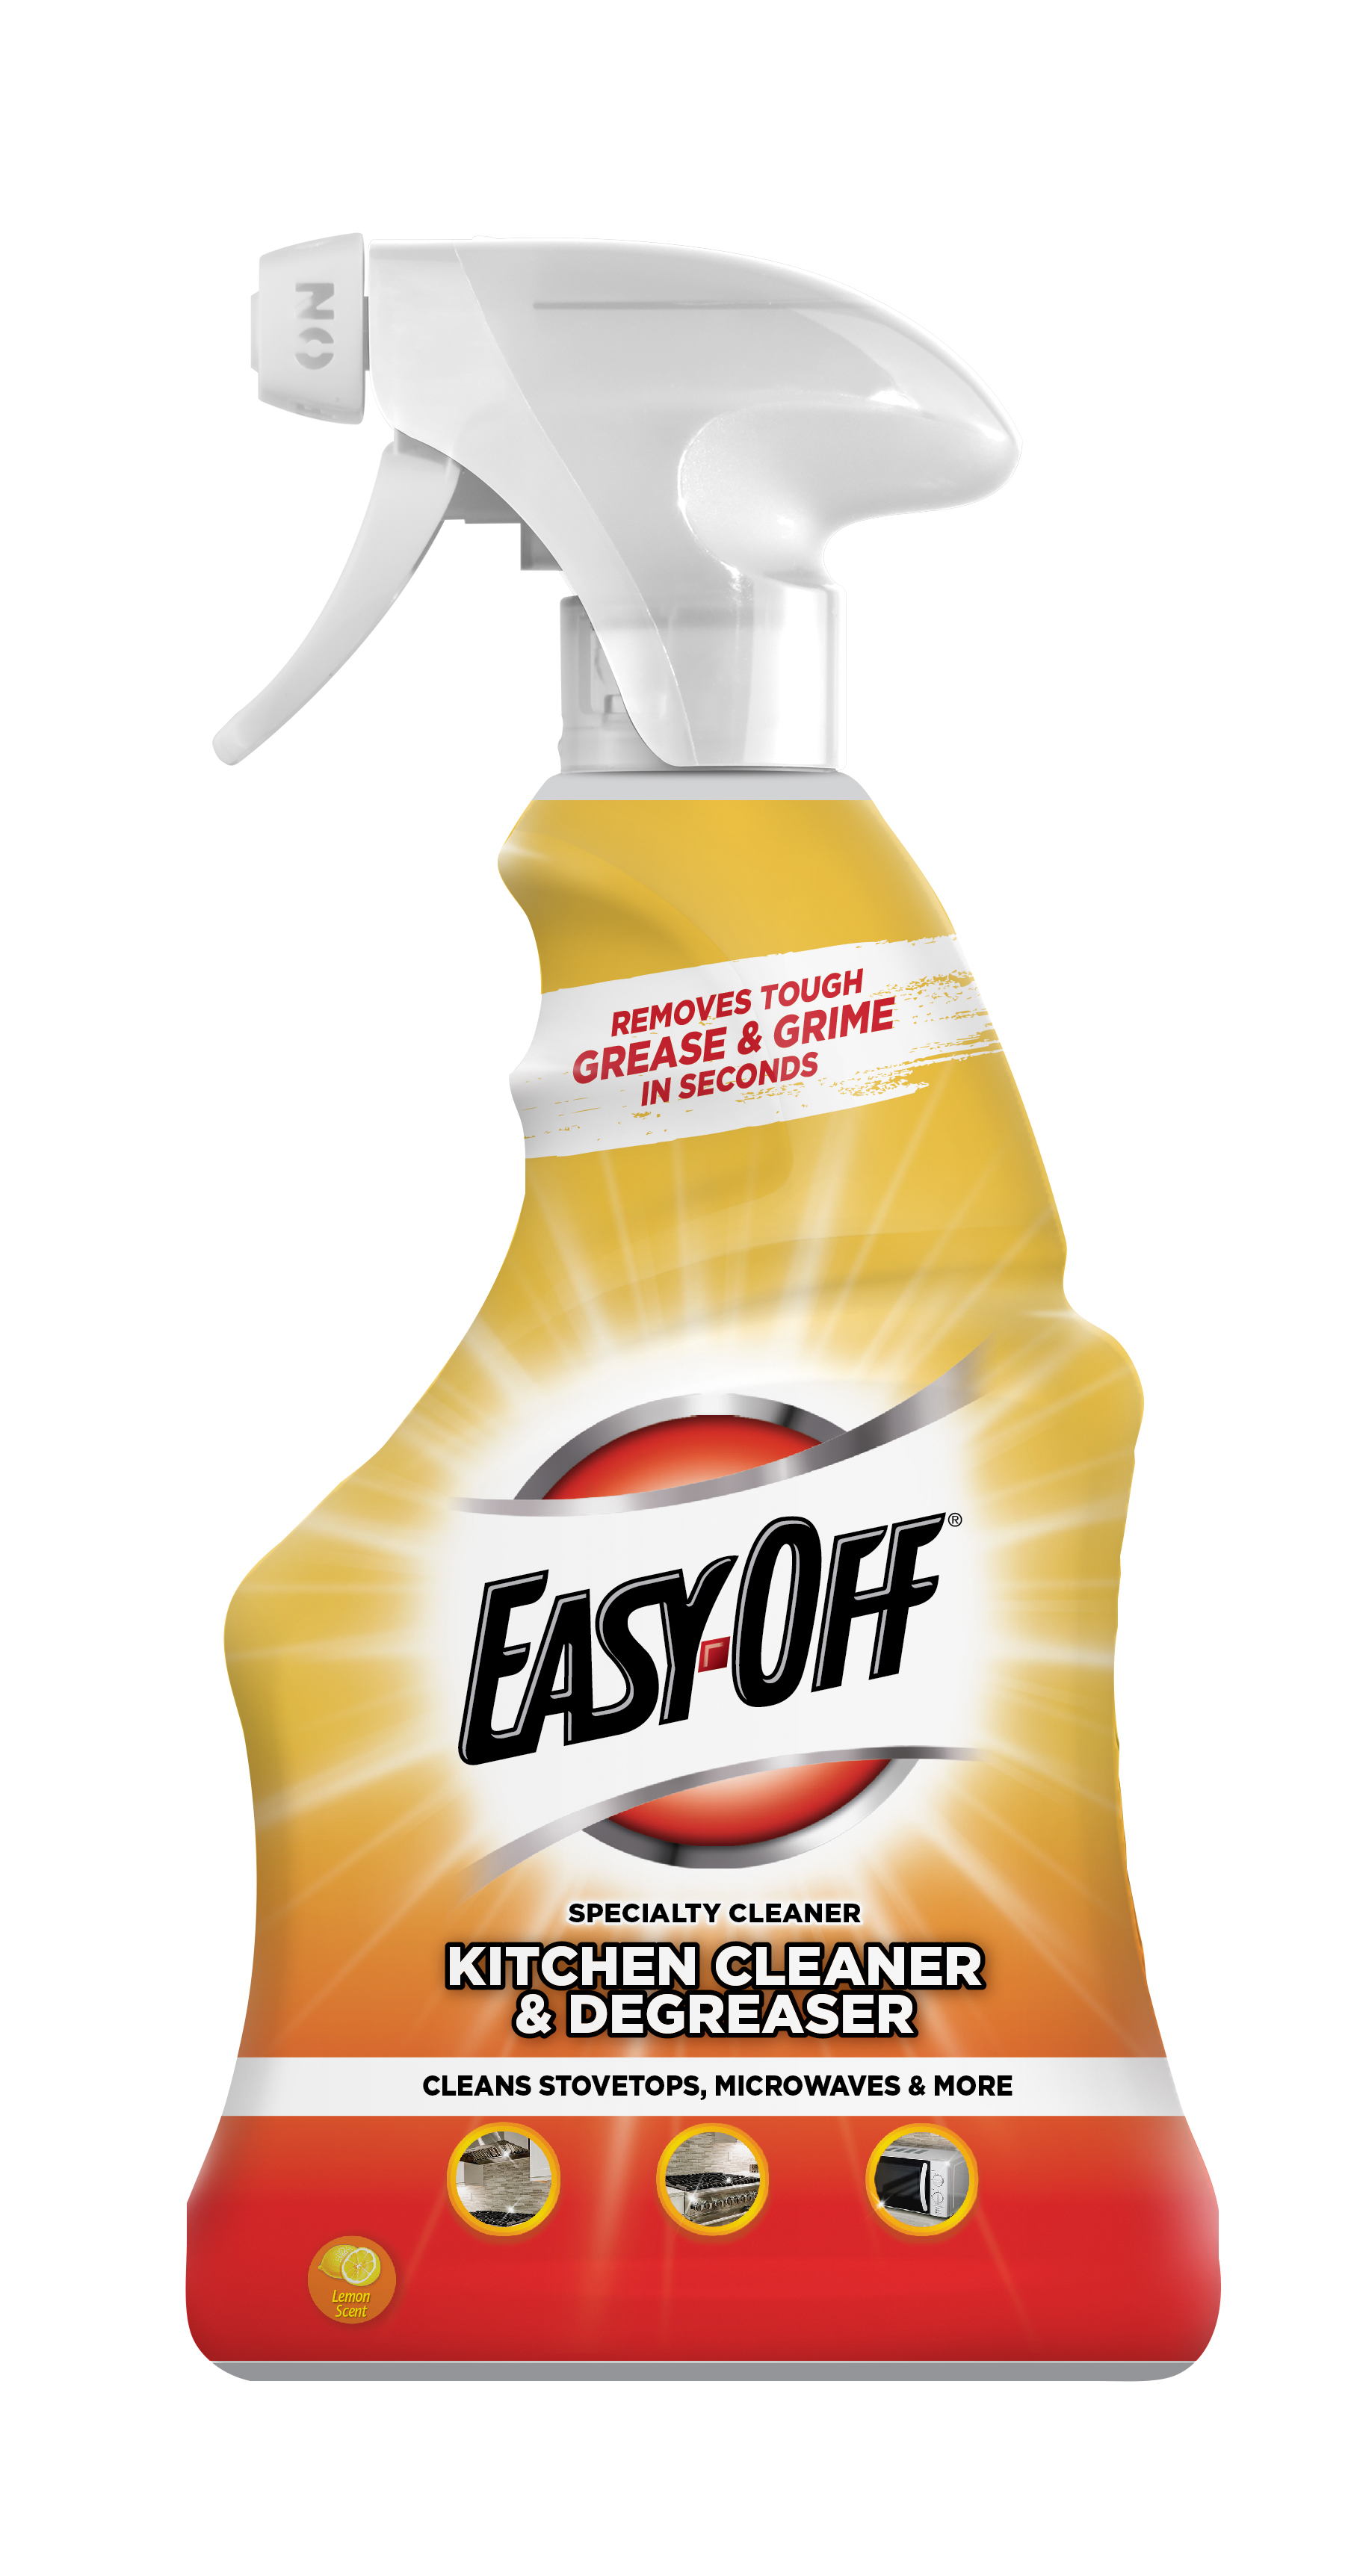 EASYOFF Kitchen Degreaser Specialty Cleaner